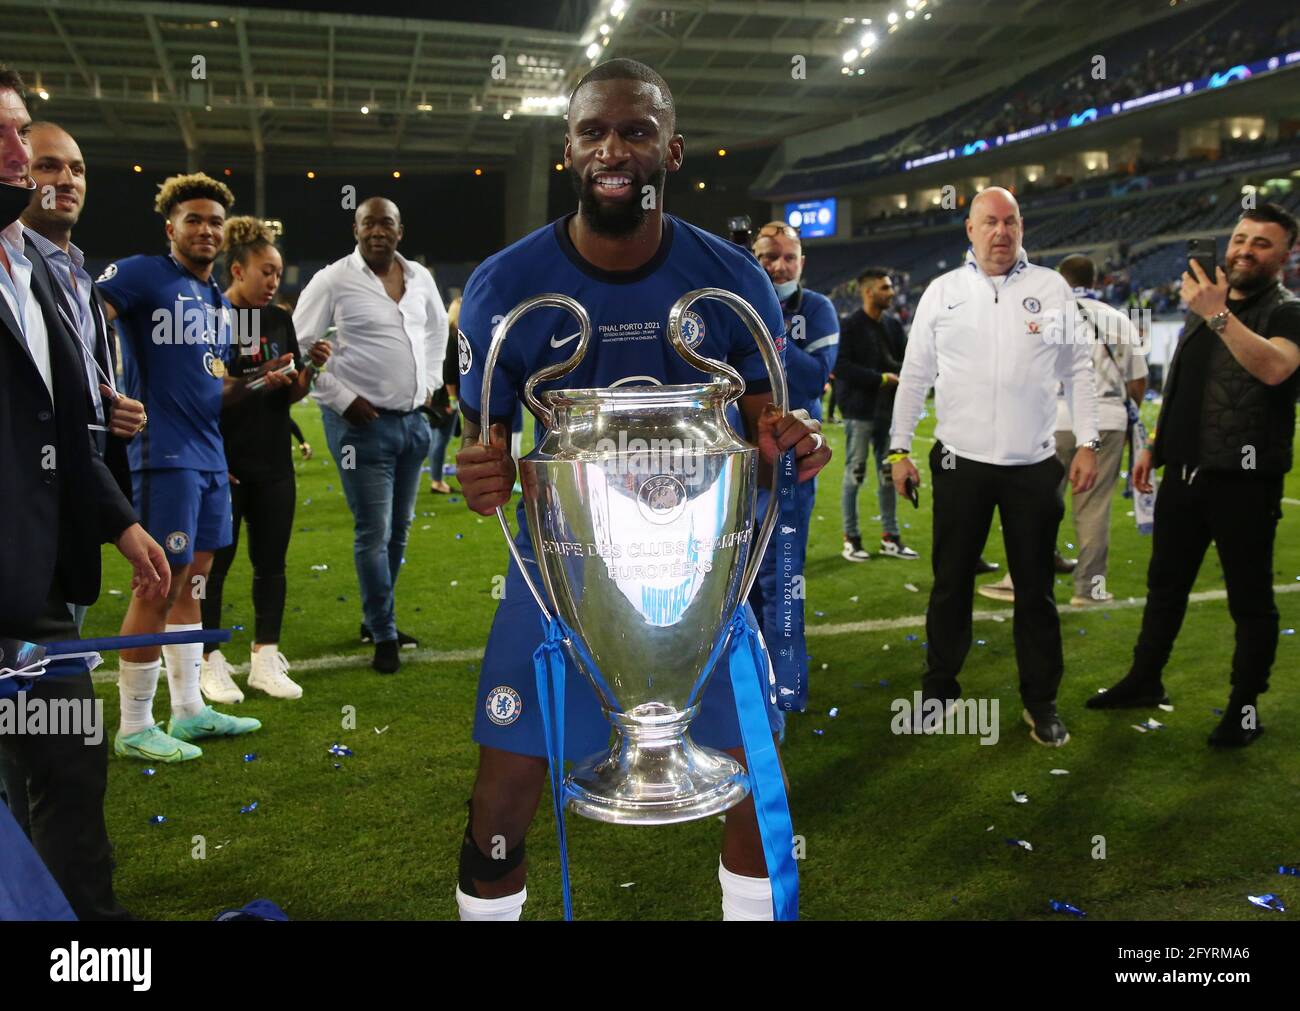 Porto, Portugal, 29th May 2021. Antonio Rudiger of Chelsea with the trophy  during the UEFA Champions League match at the Estadio do Dragao, Porto.  Picture credit should read: David Klein / Sportimage